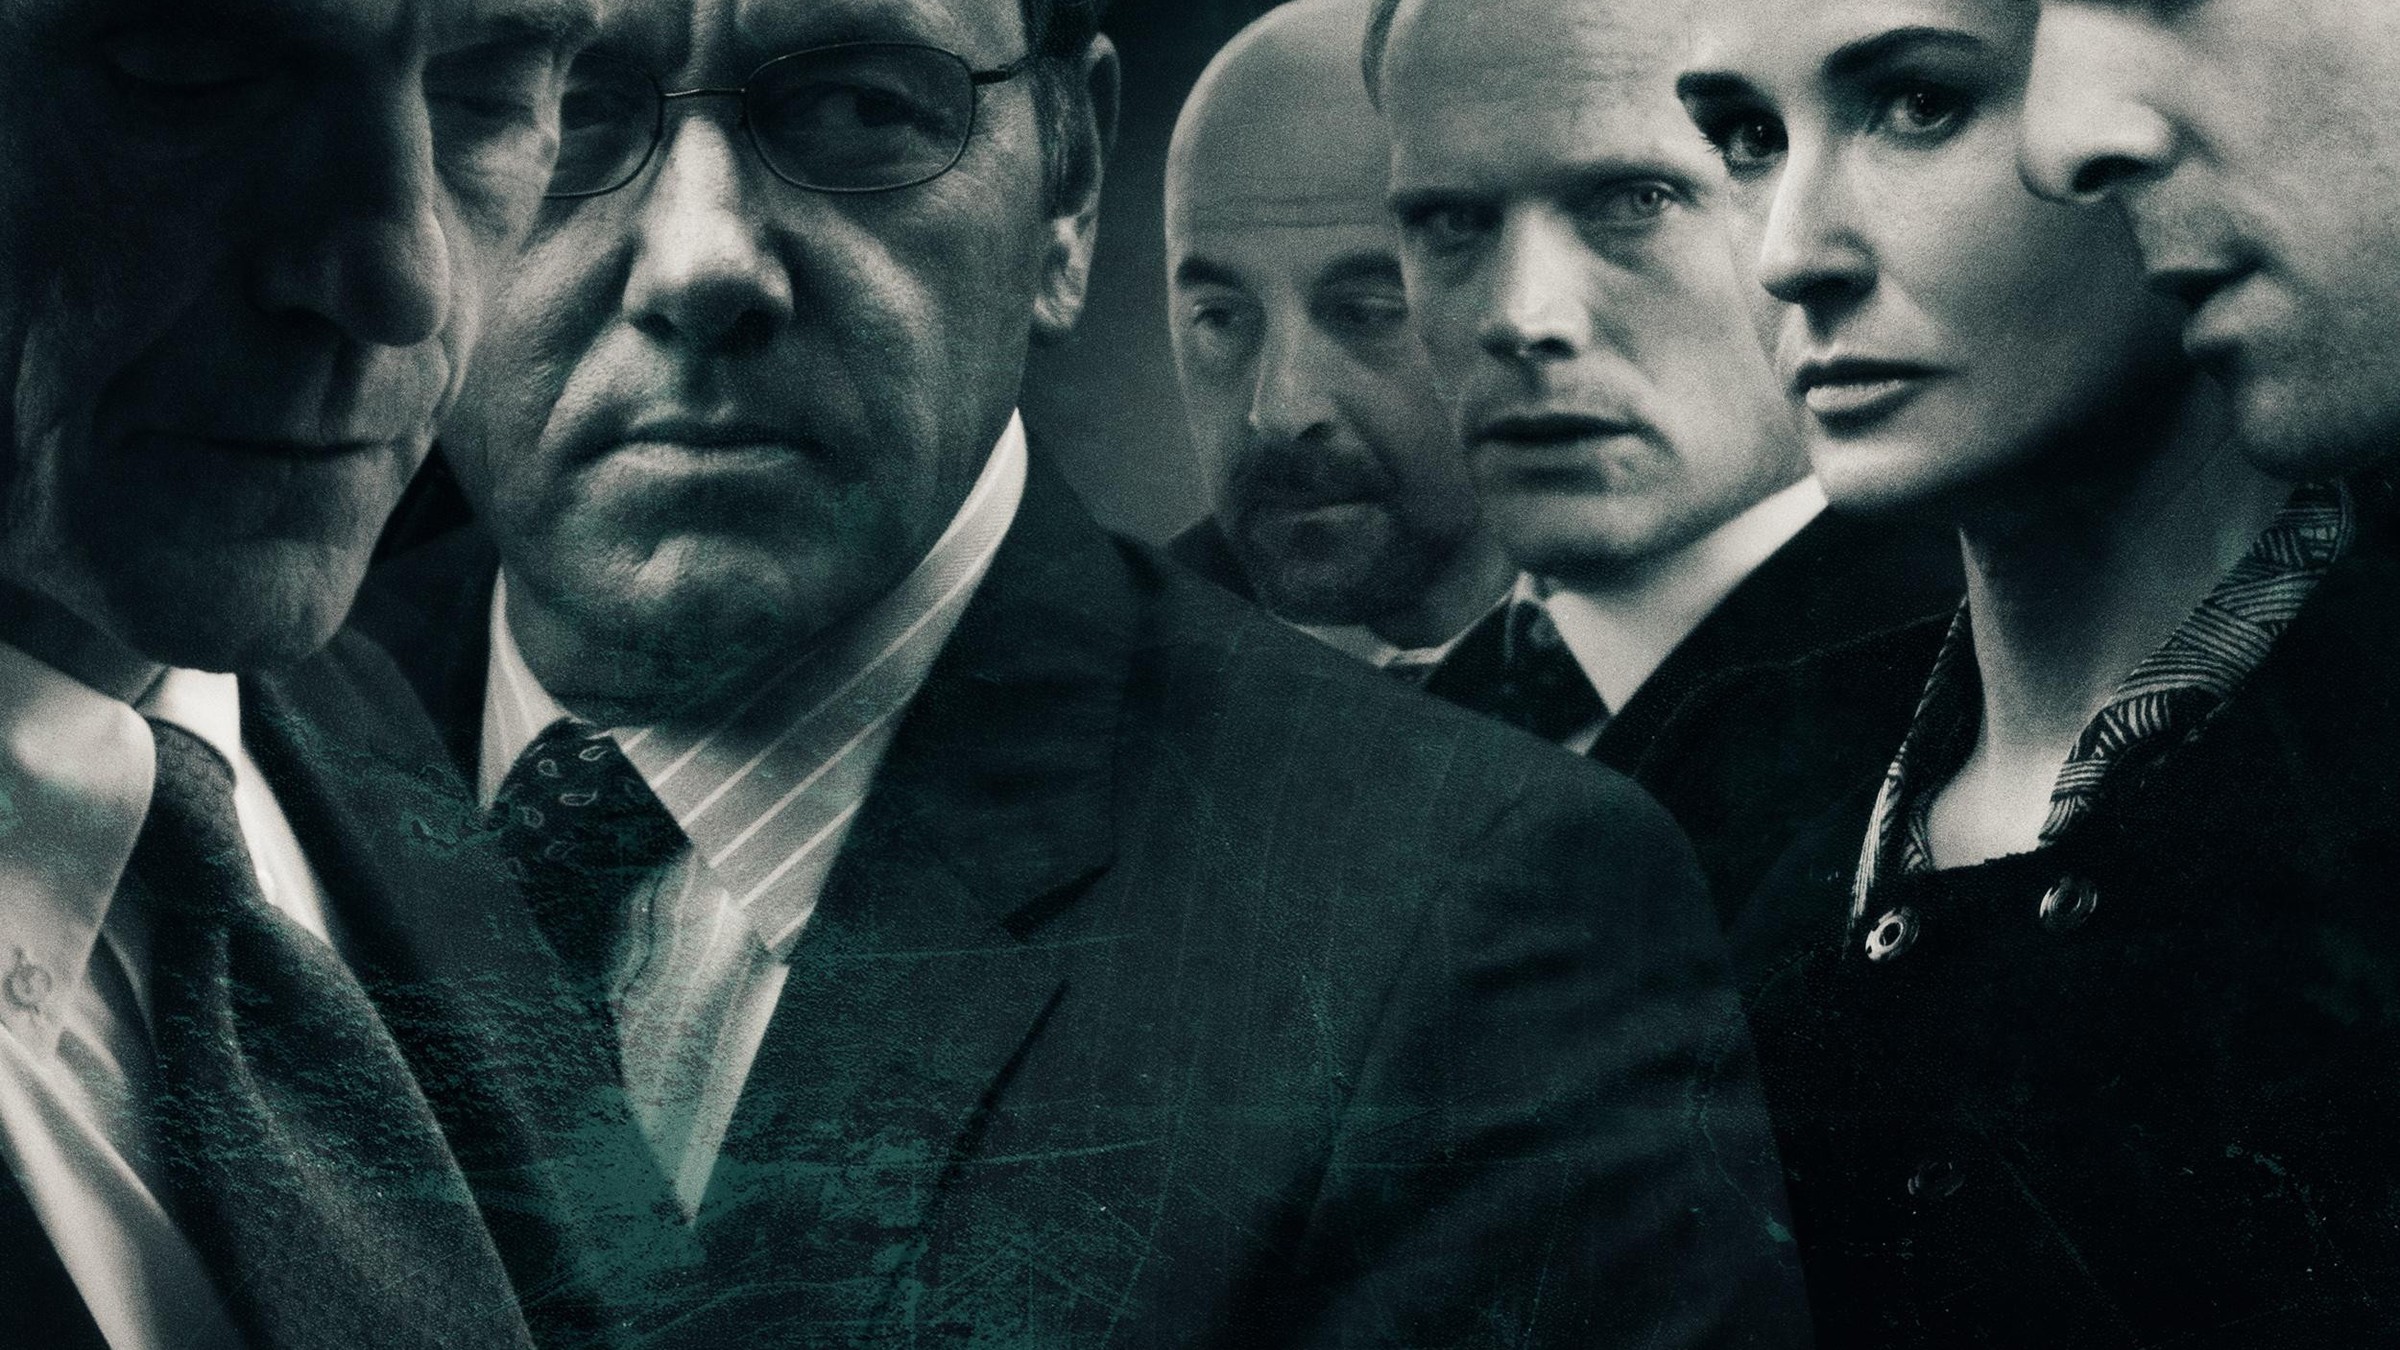 Irons Kevin Spacey Paul Bettany Stanley Tucci Wallpaper